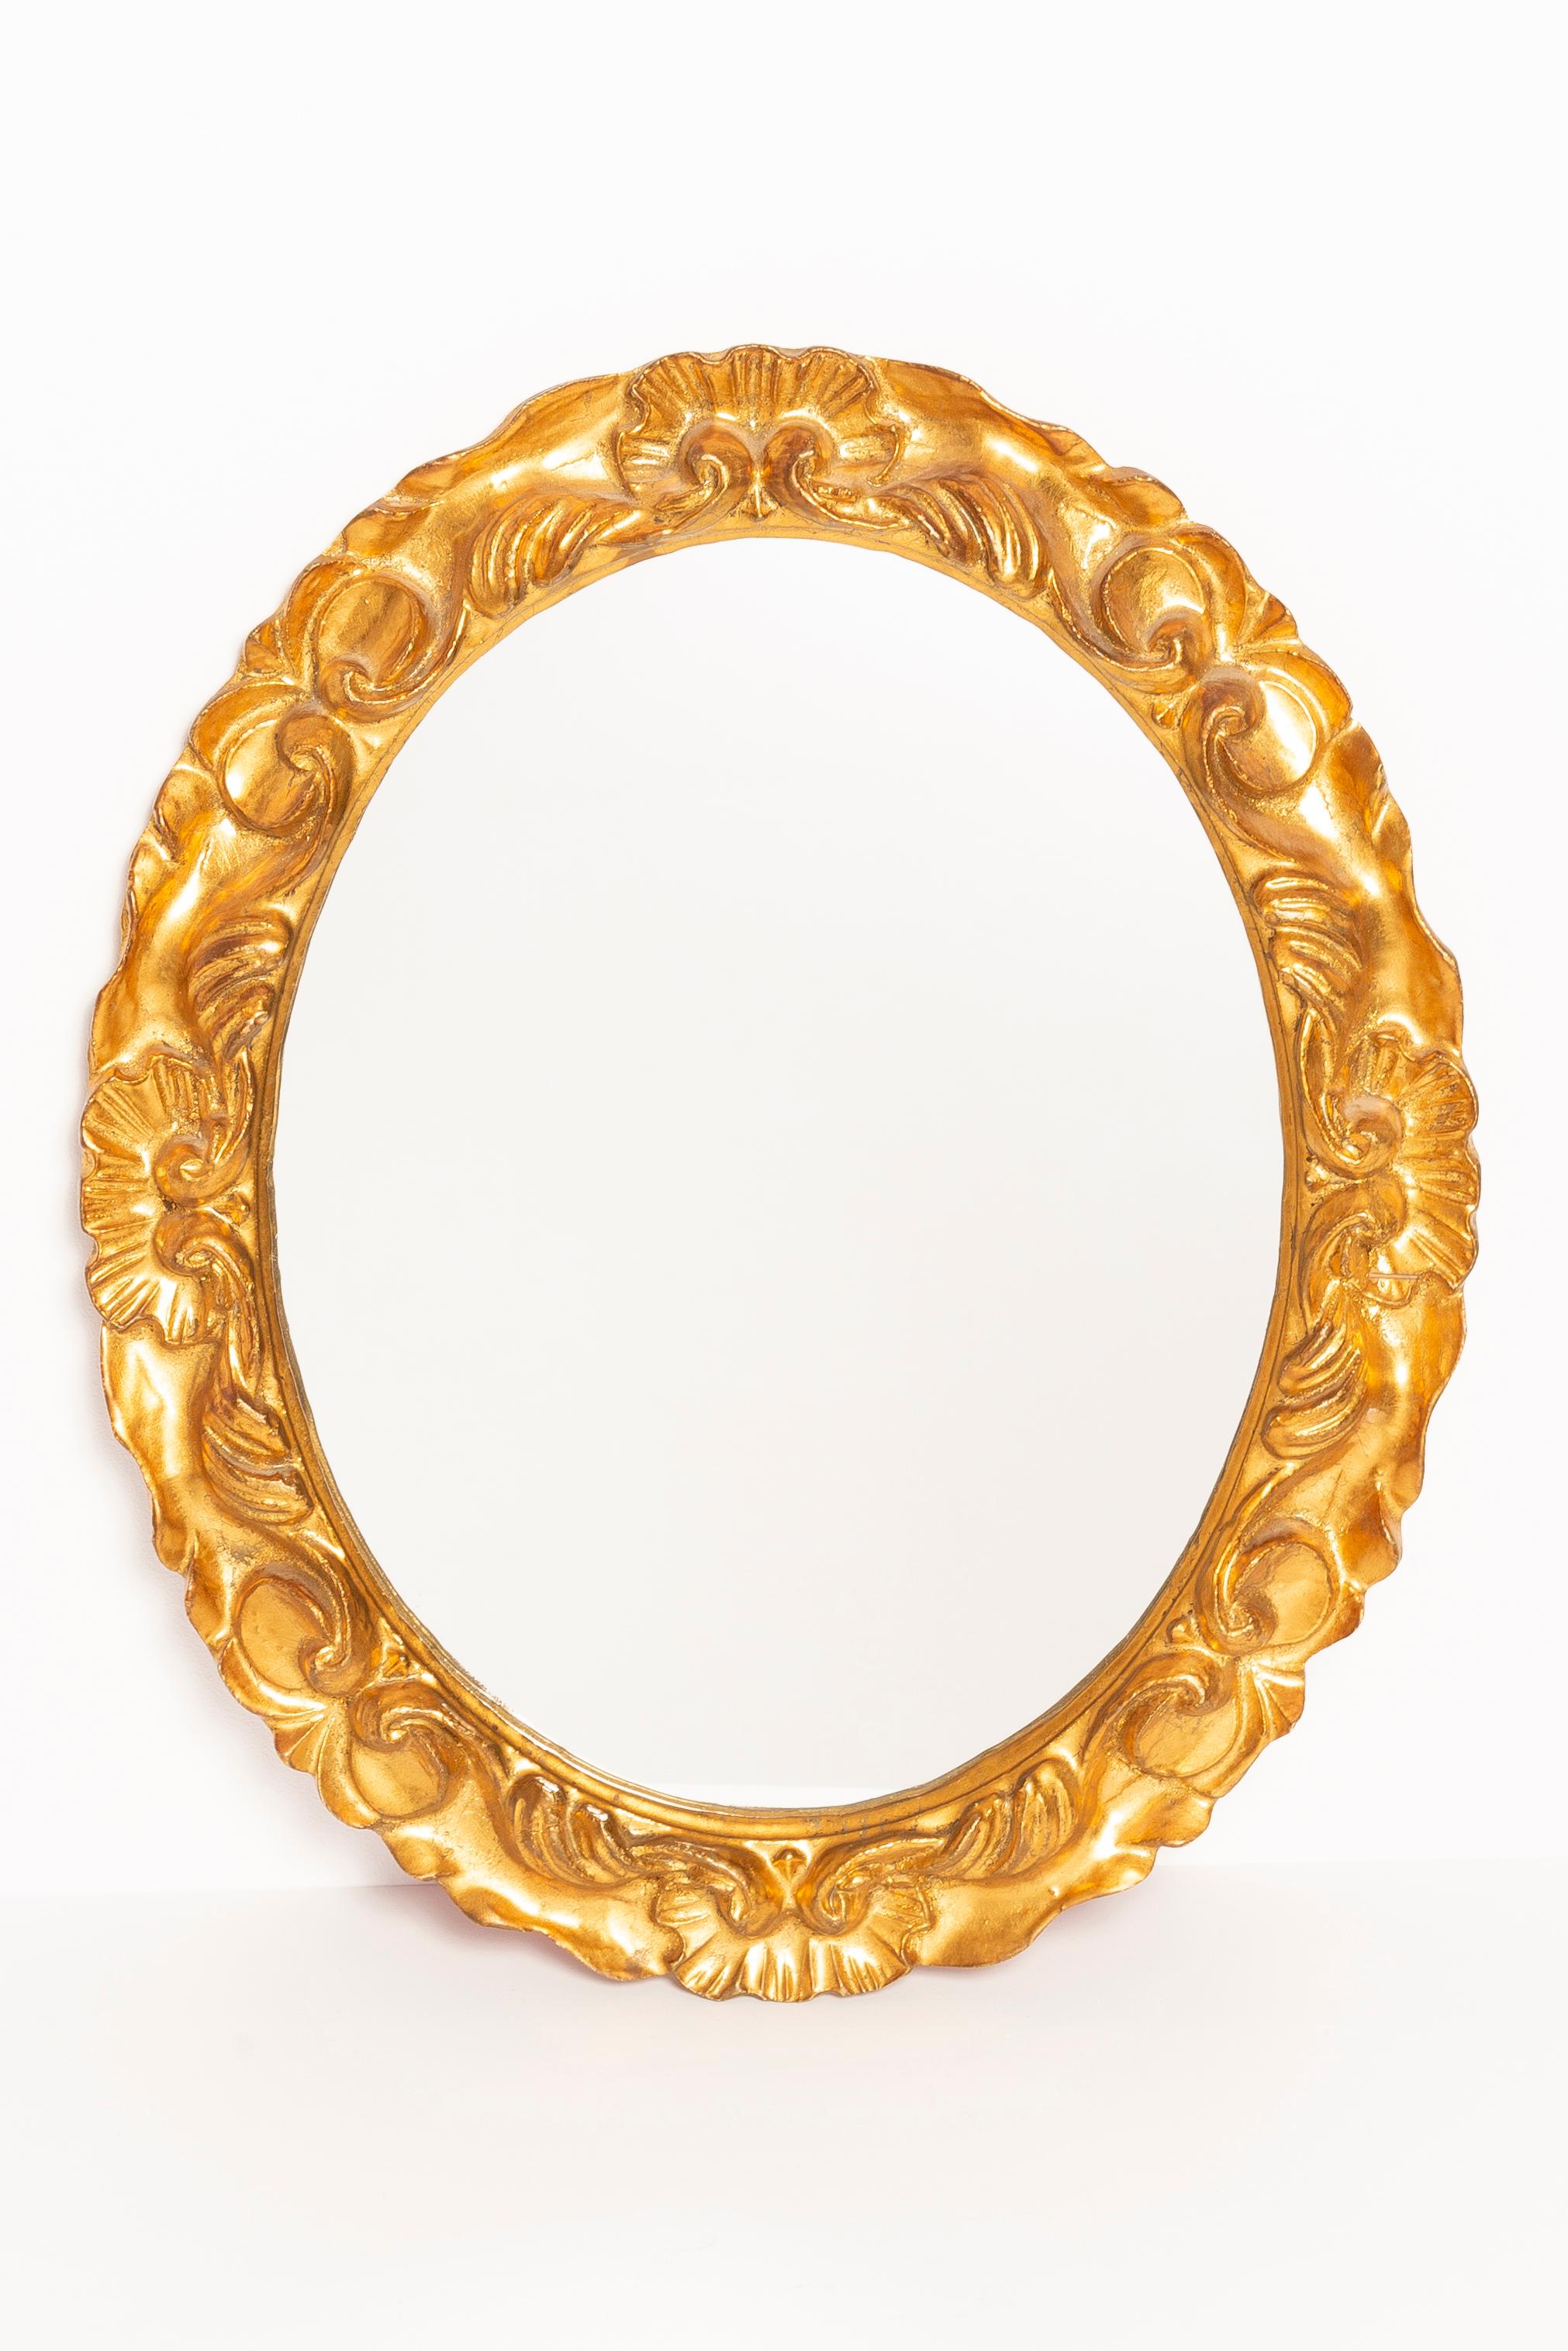 A beautiful oval mirror in a golden decorative frame with flowers from Italy. The frame is made of wood. Mirror is in very good vintage condition, no damage or cracks in the frame. Original glass. Beautiful piece for every interior! Red velvet on